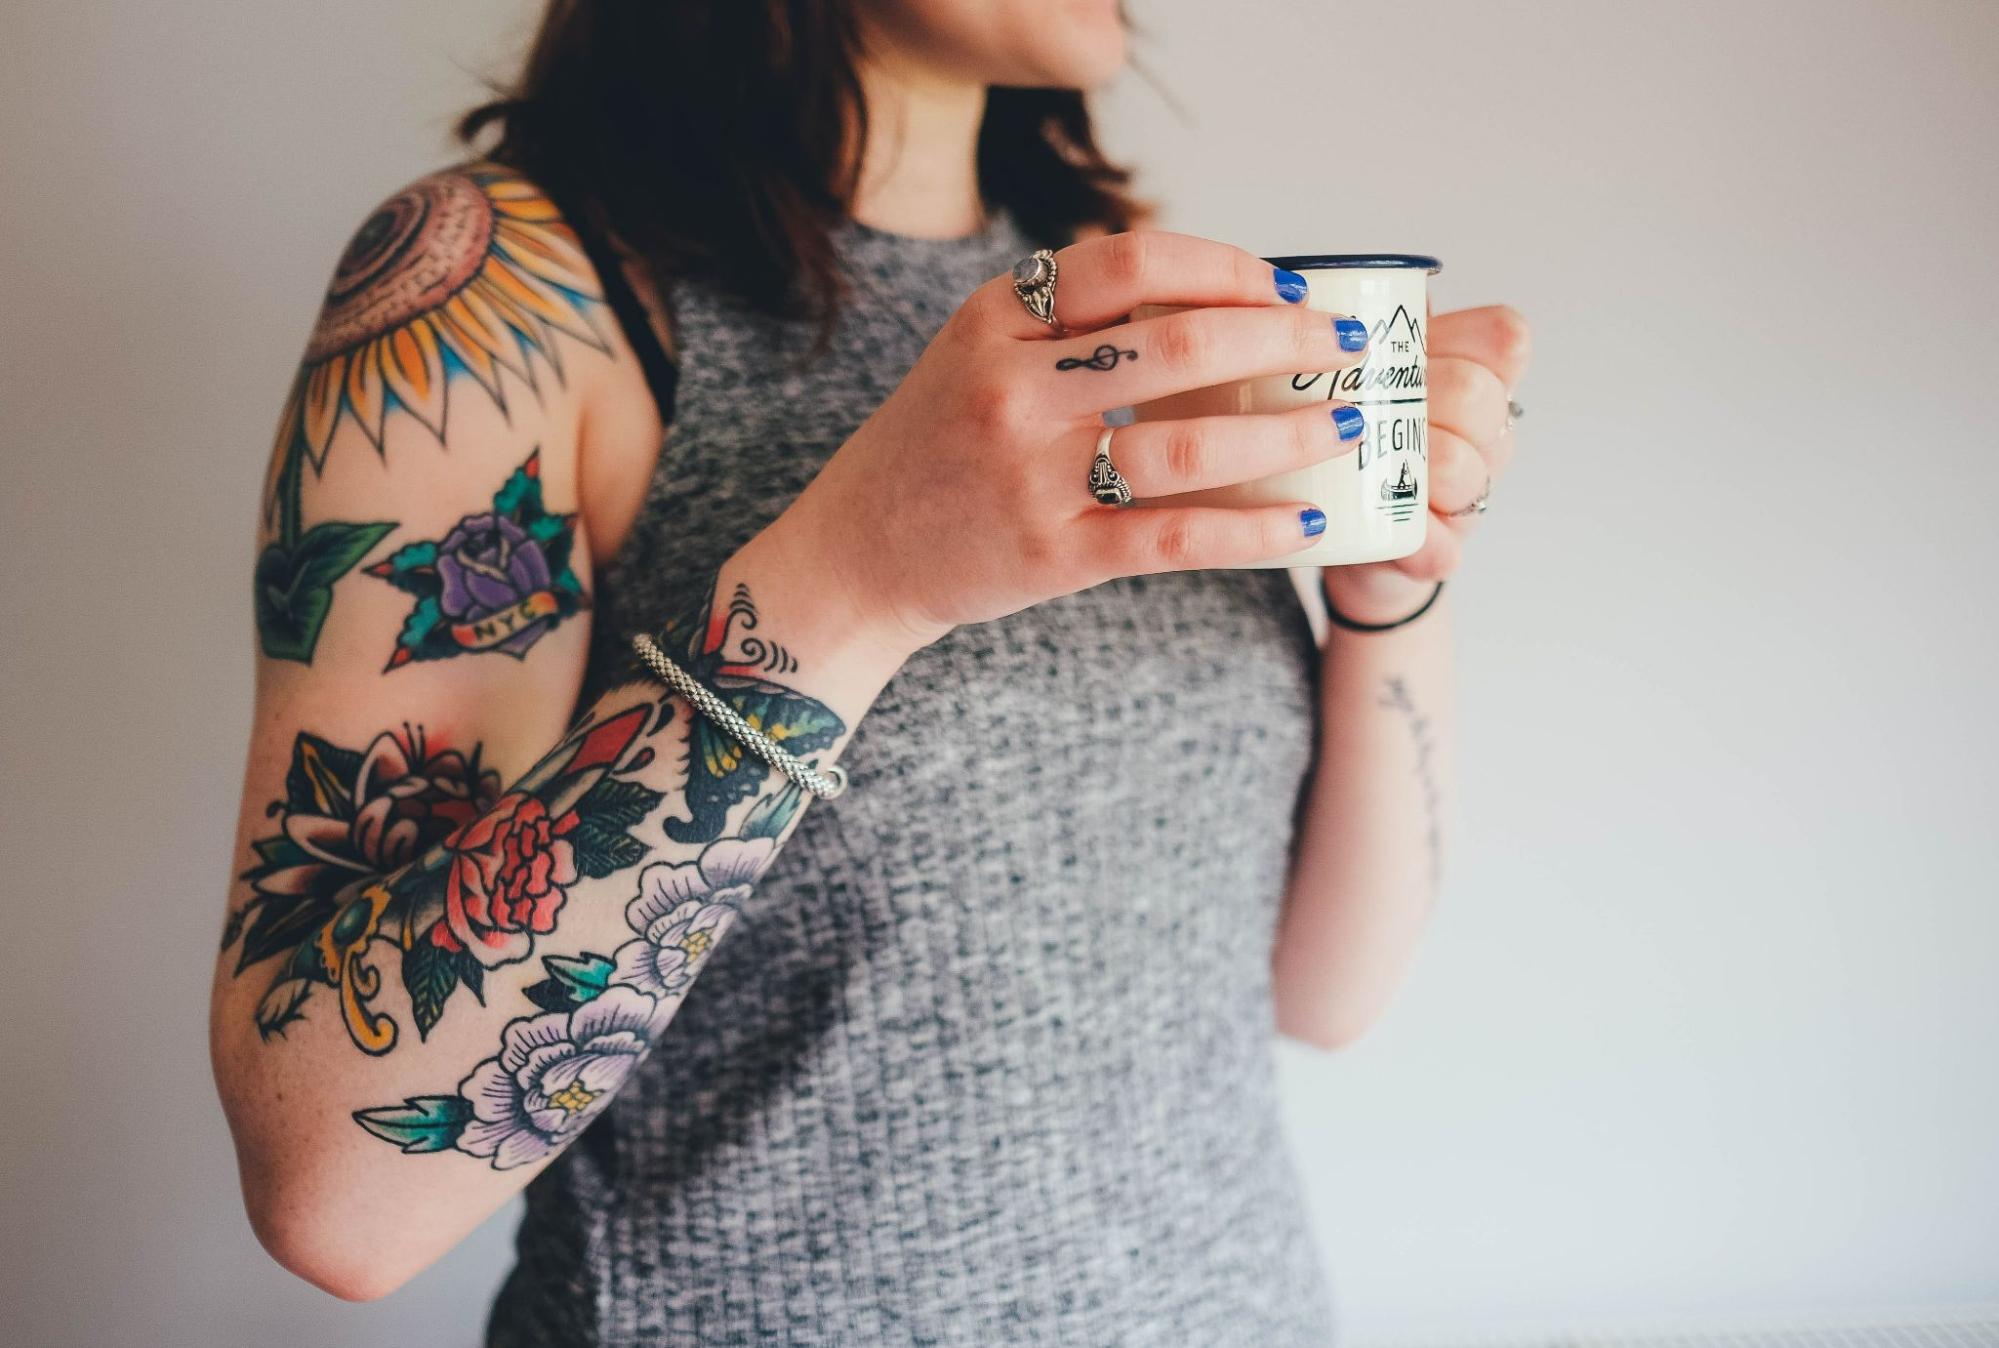 A tattooed woman casually sipping coffee wears a silver bangle and rings.